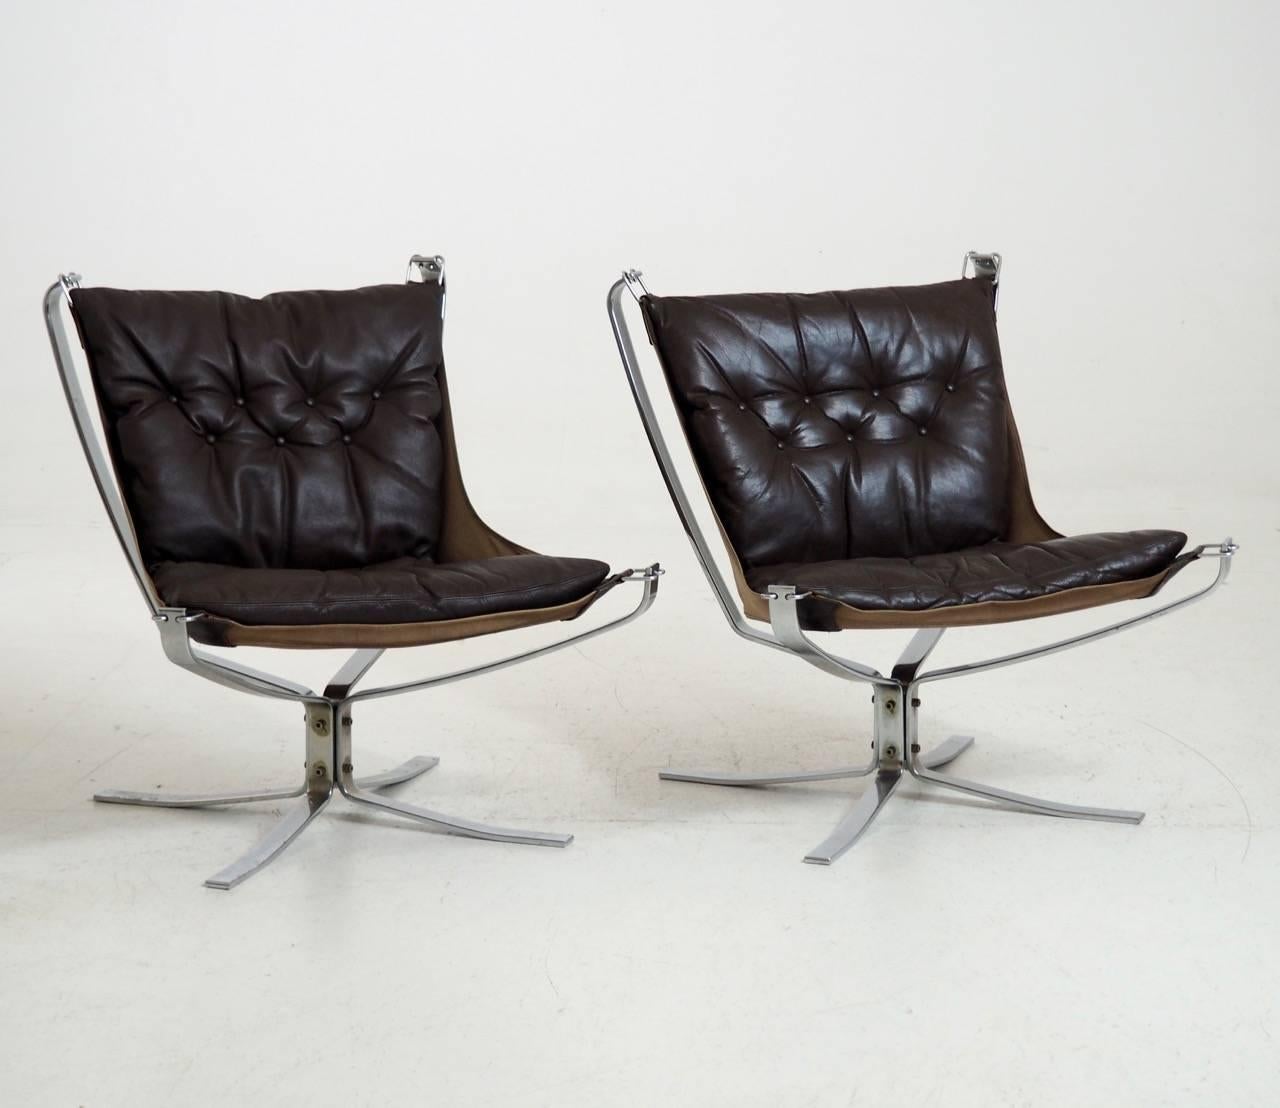 Set of two falcon chairs by Sigurd Resell for Vatne Møbler in Sweden, in chrome steel frame and brown leather. Good condition.